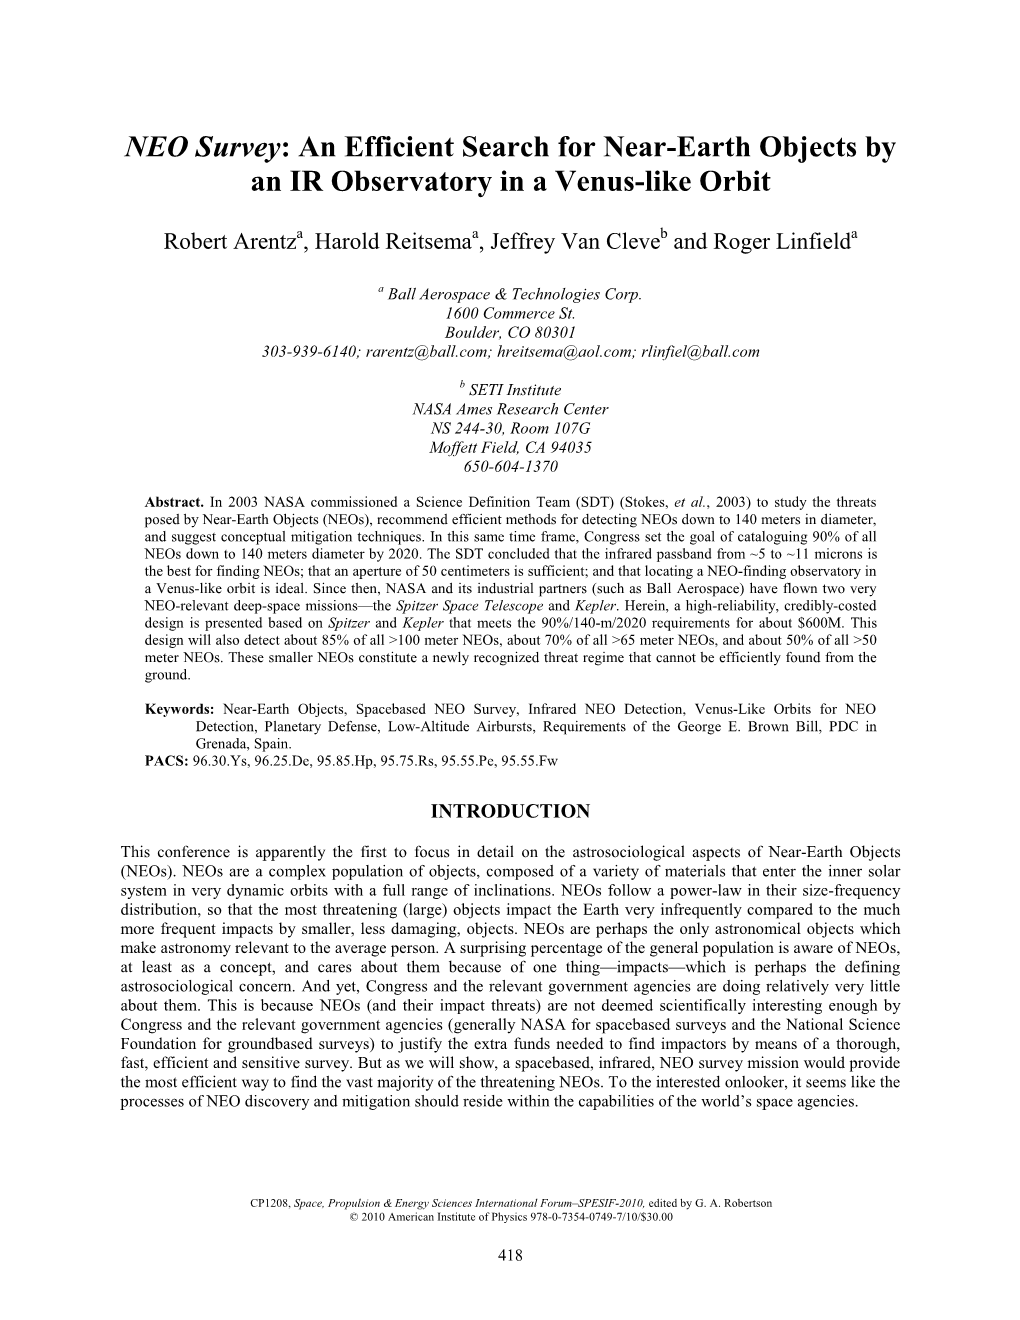 NEO Survey: an Efficient Search for Near-Earth Objects by an IR Observatory in a Venus-Like Orbit